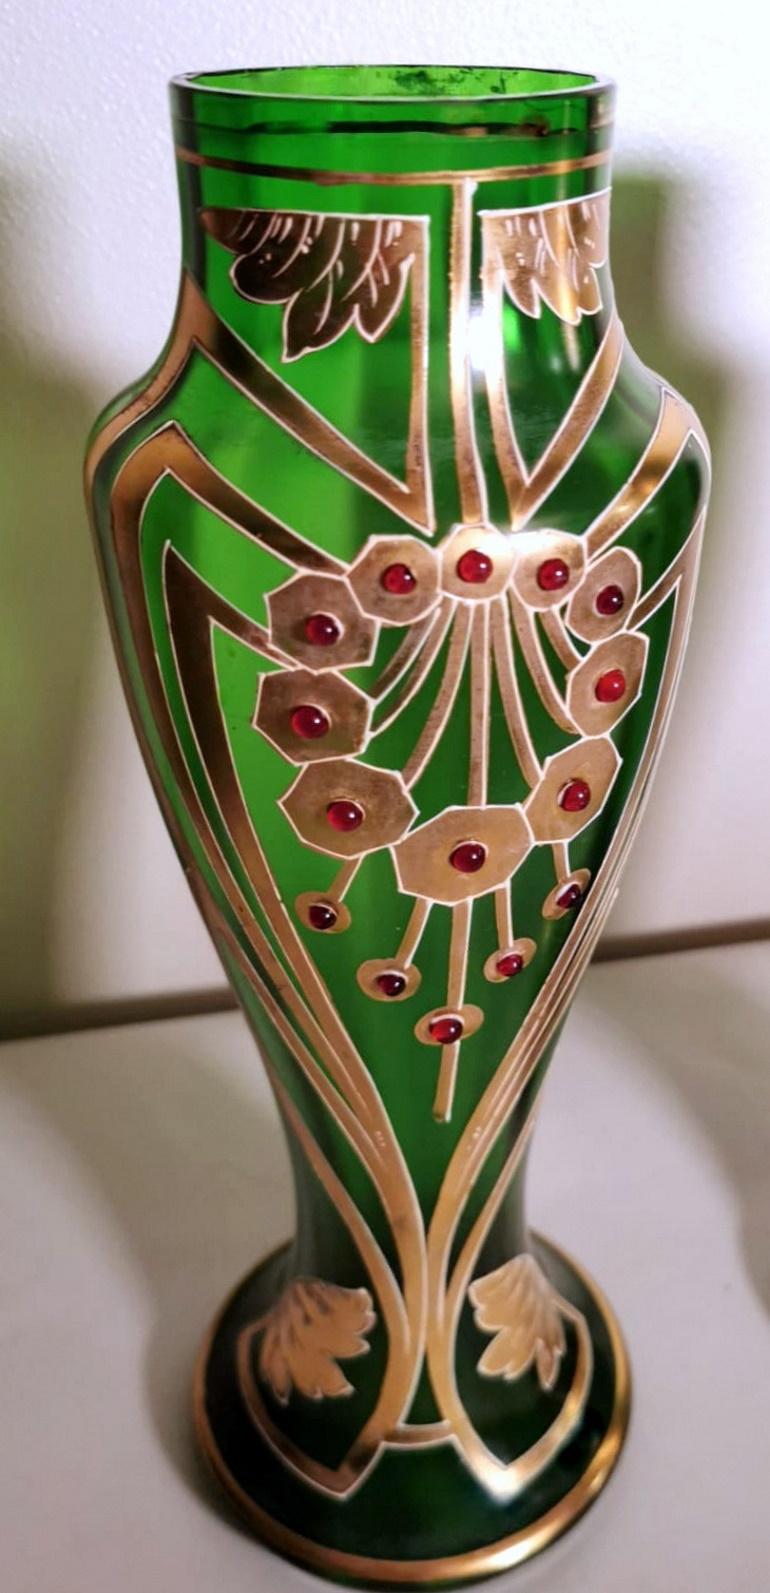 Art Noveau Legras & Cie Pair  French Vases Blown and Decorated with Gold EnameL In Good Condition For Sale In Prato, Tuscany